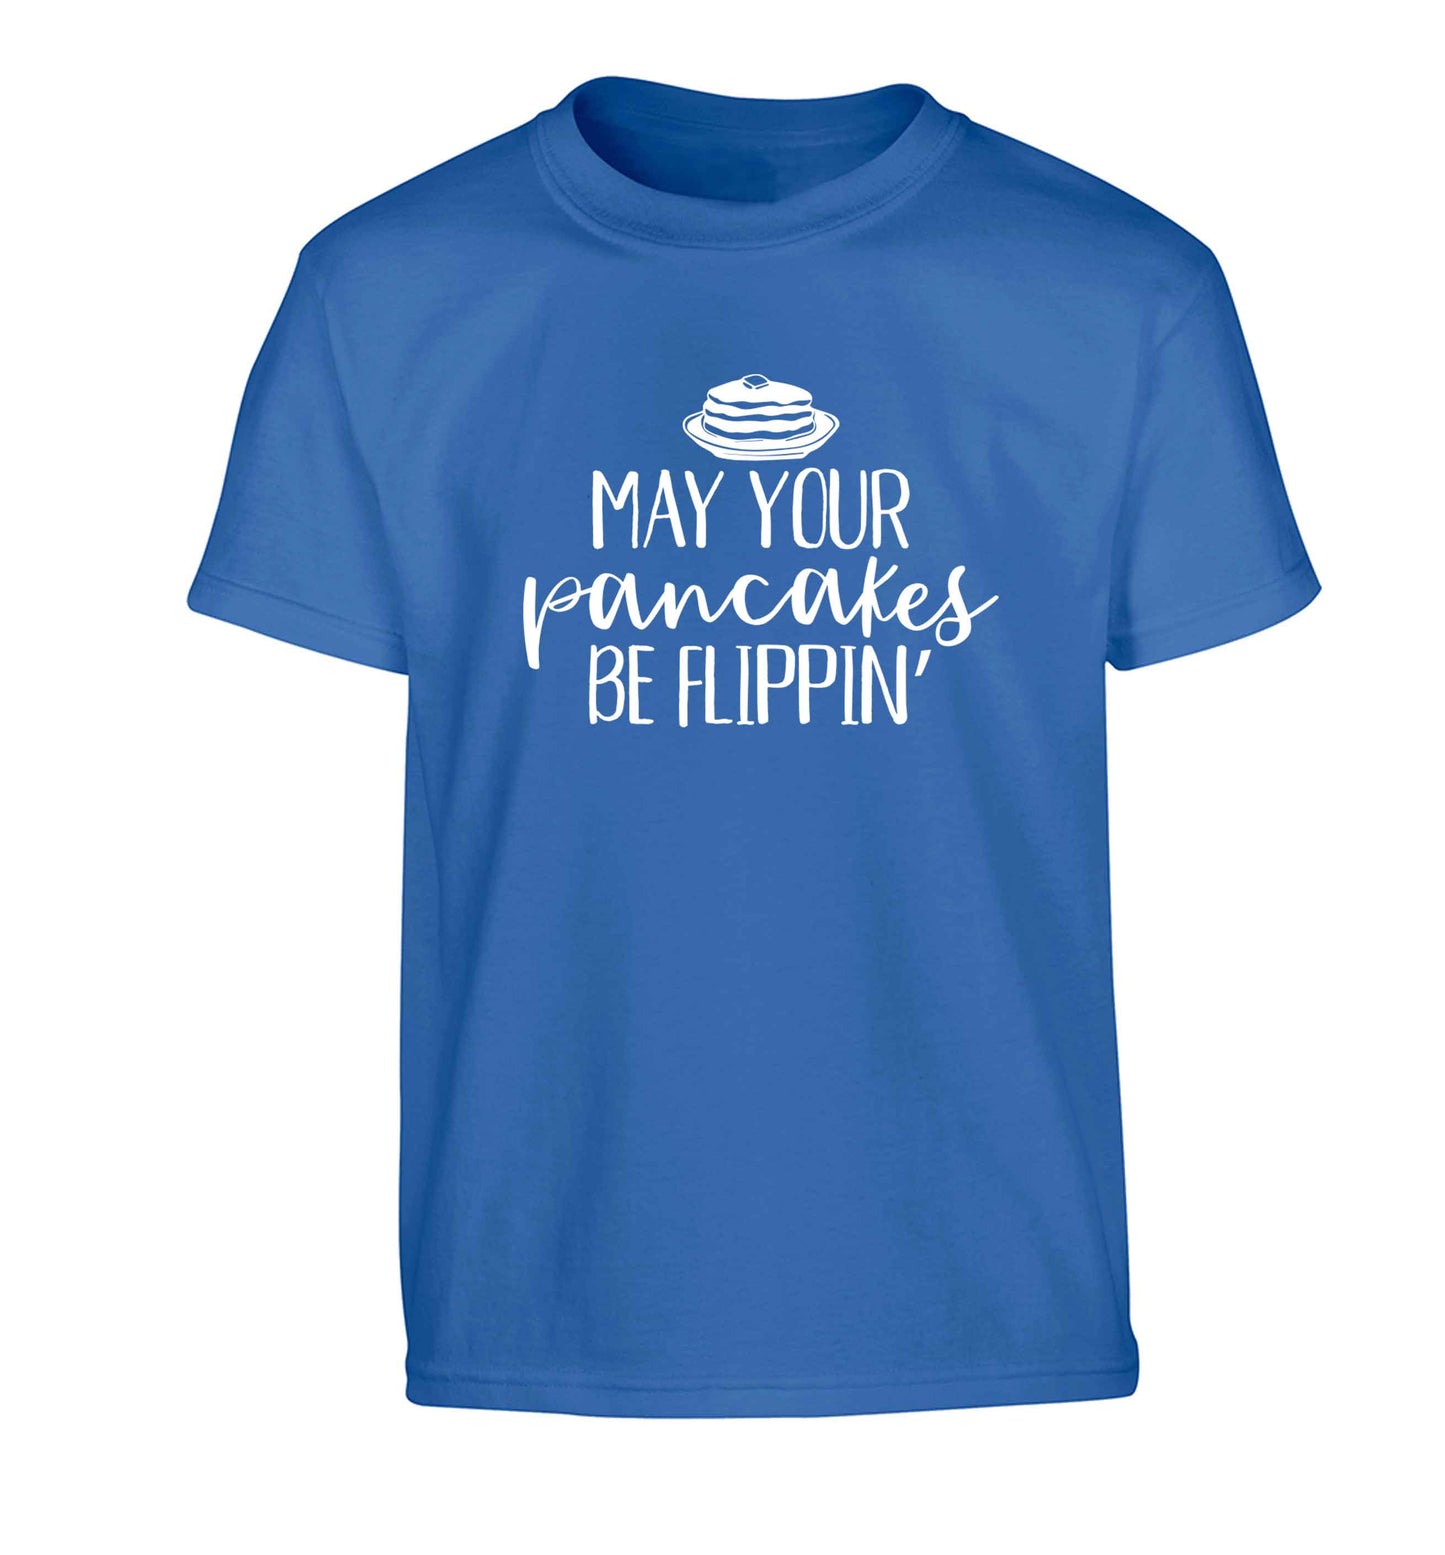 May your pancakes be flippin' Children's blue Tshirt 12-13 Years